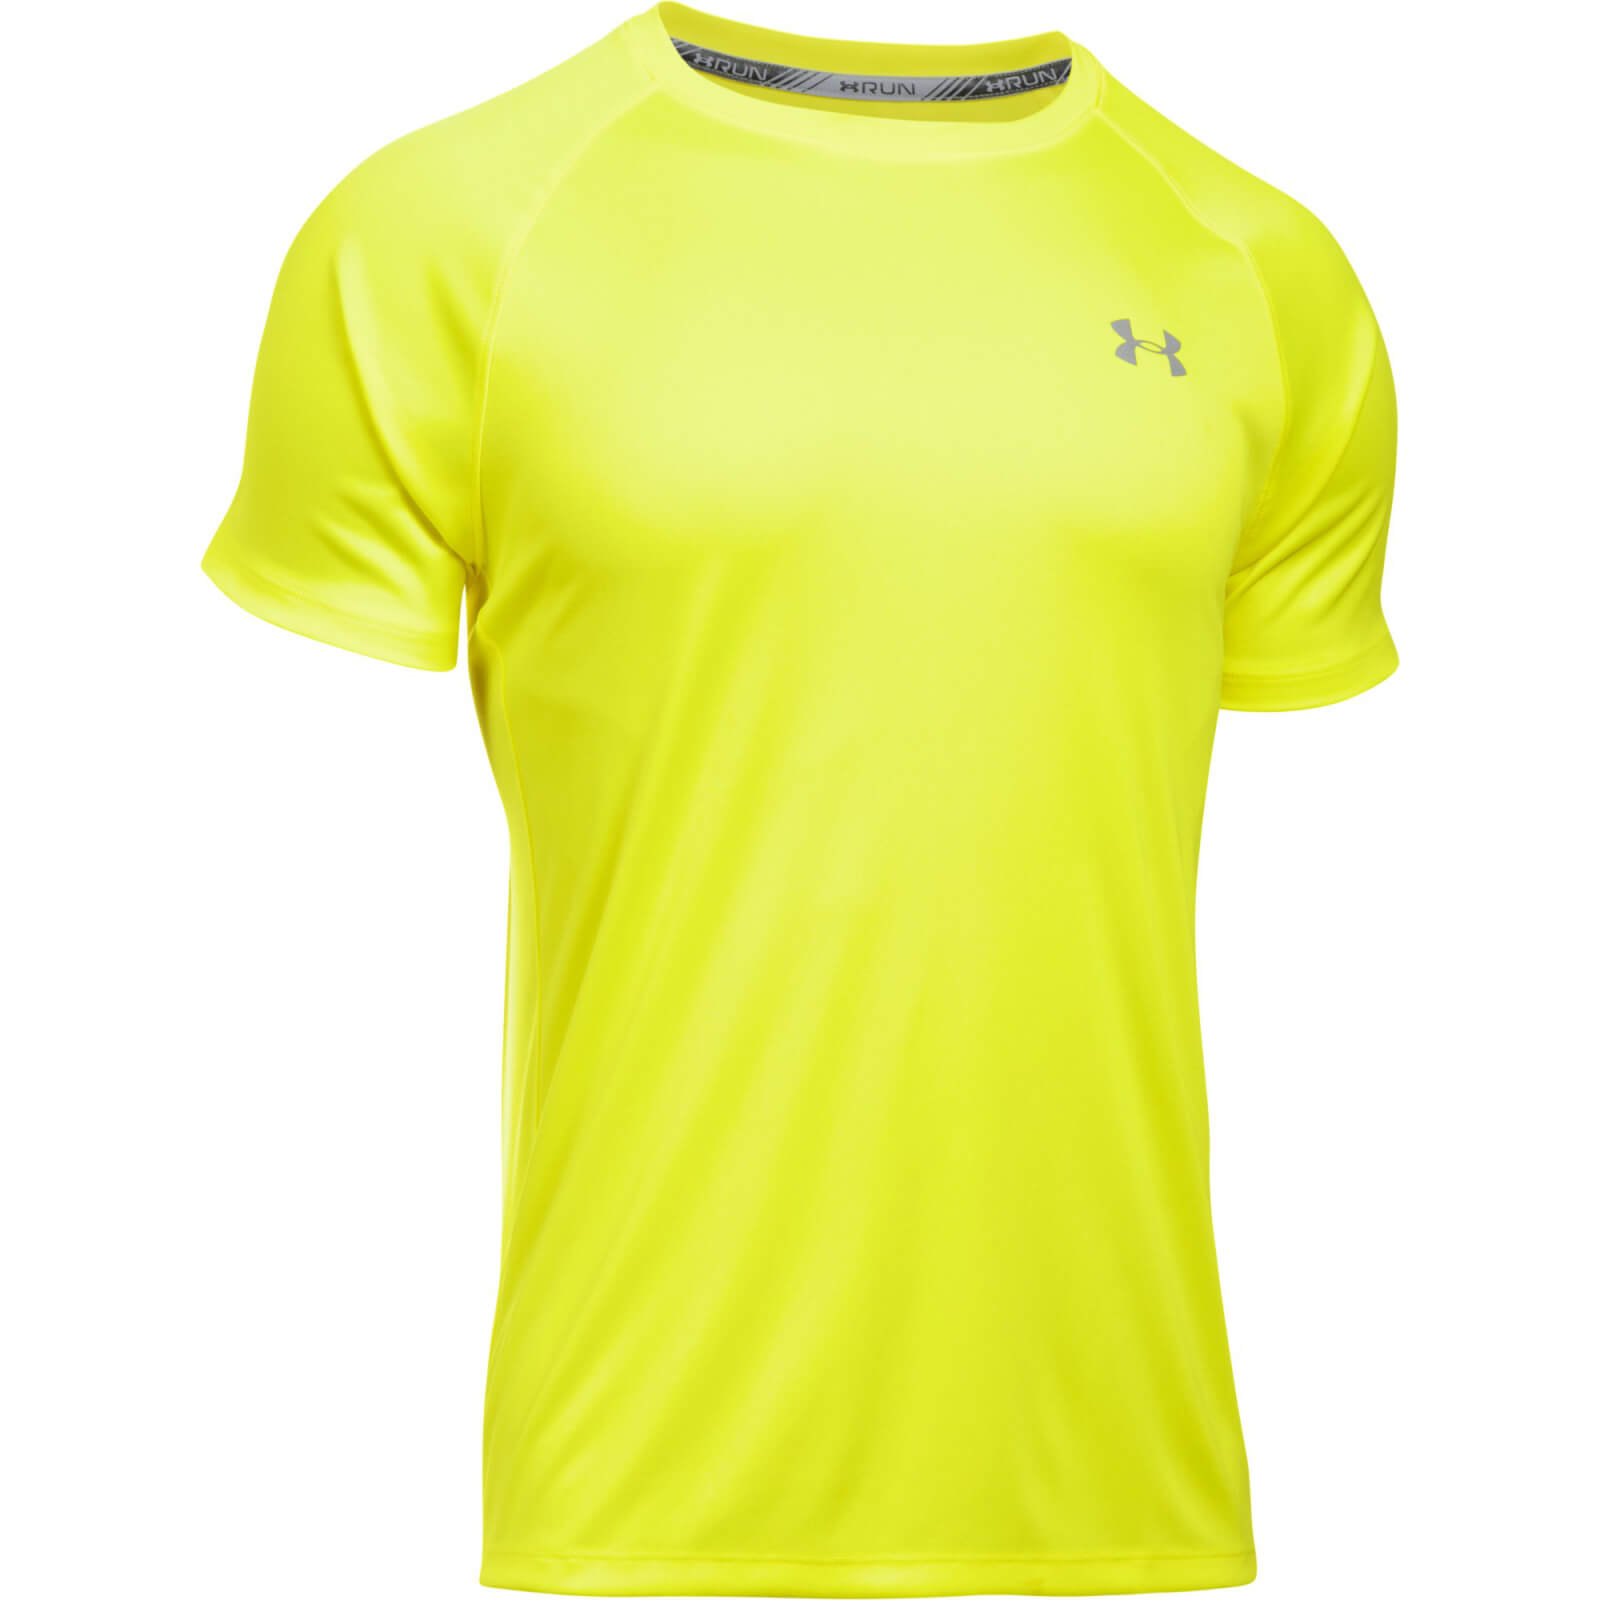 yellow under armour top